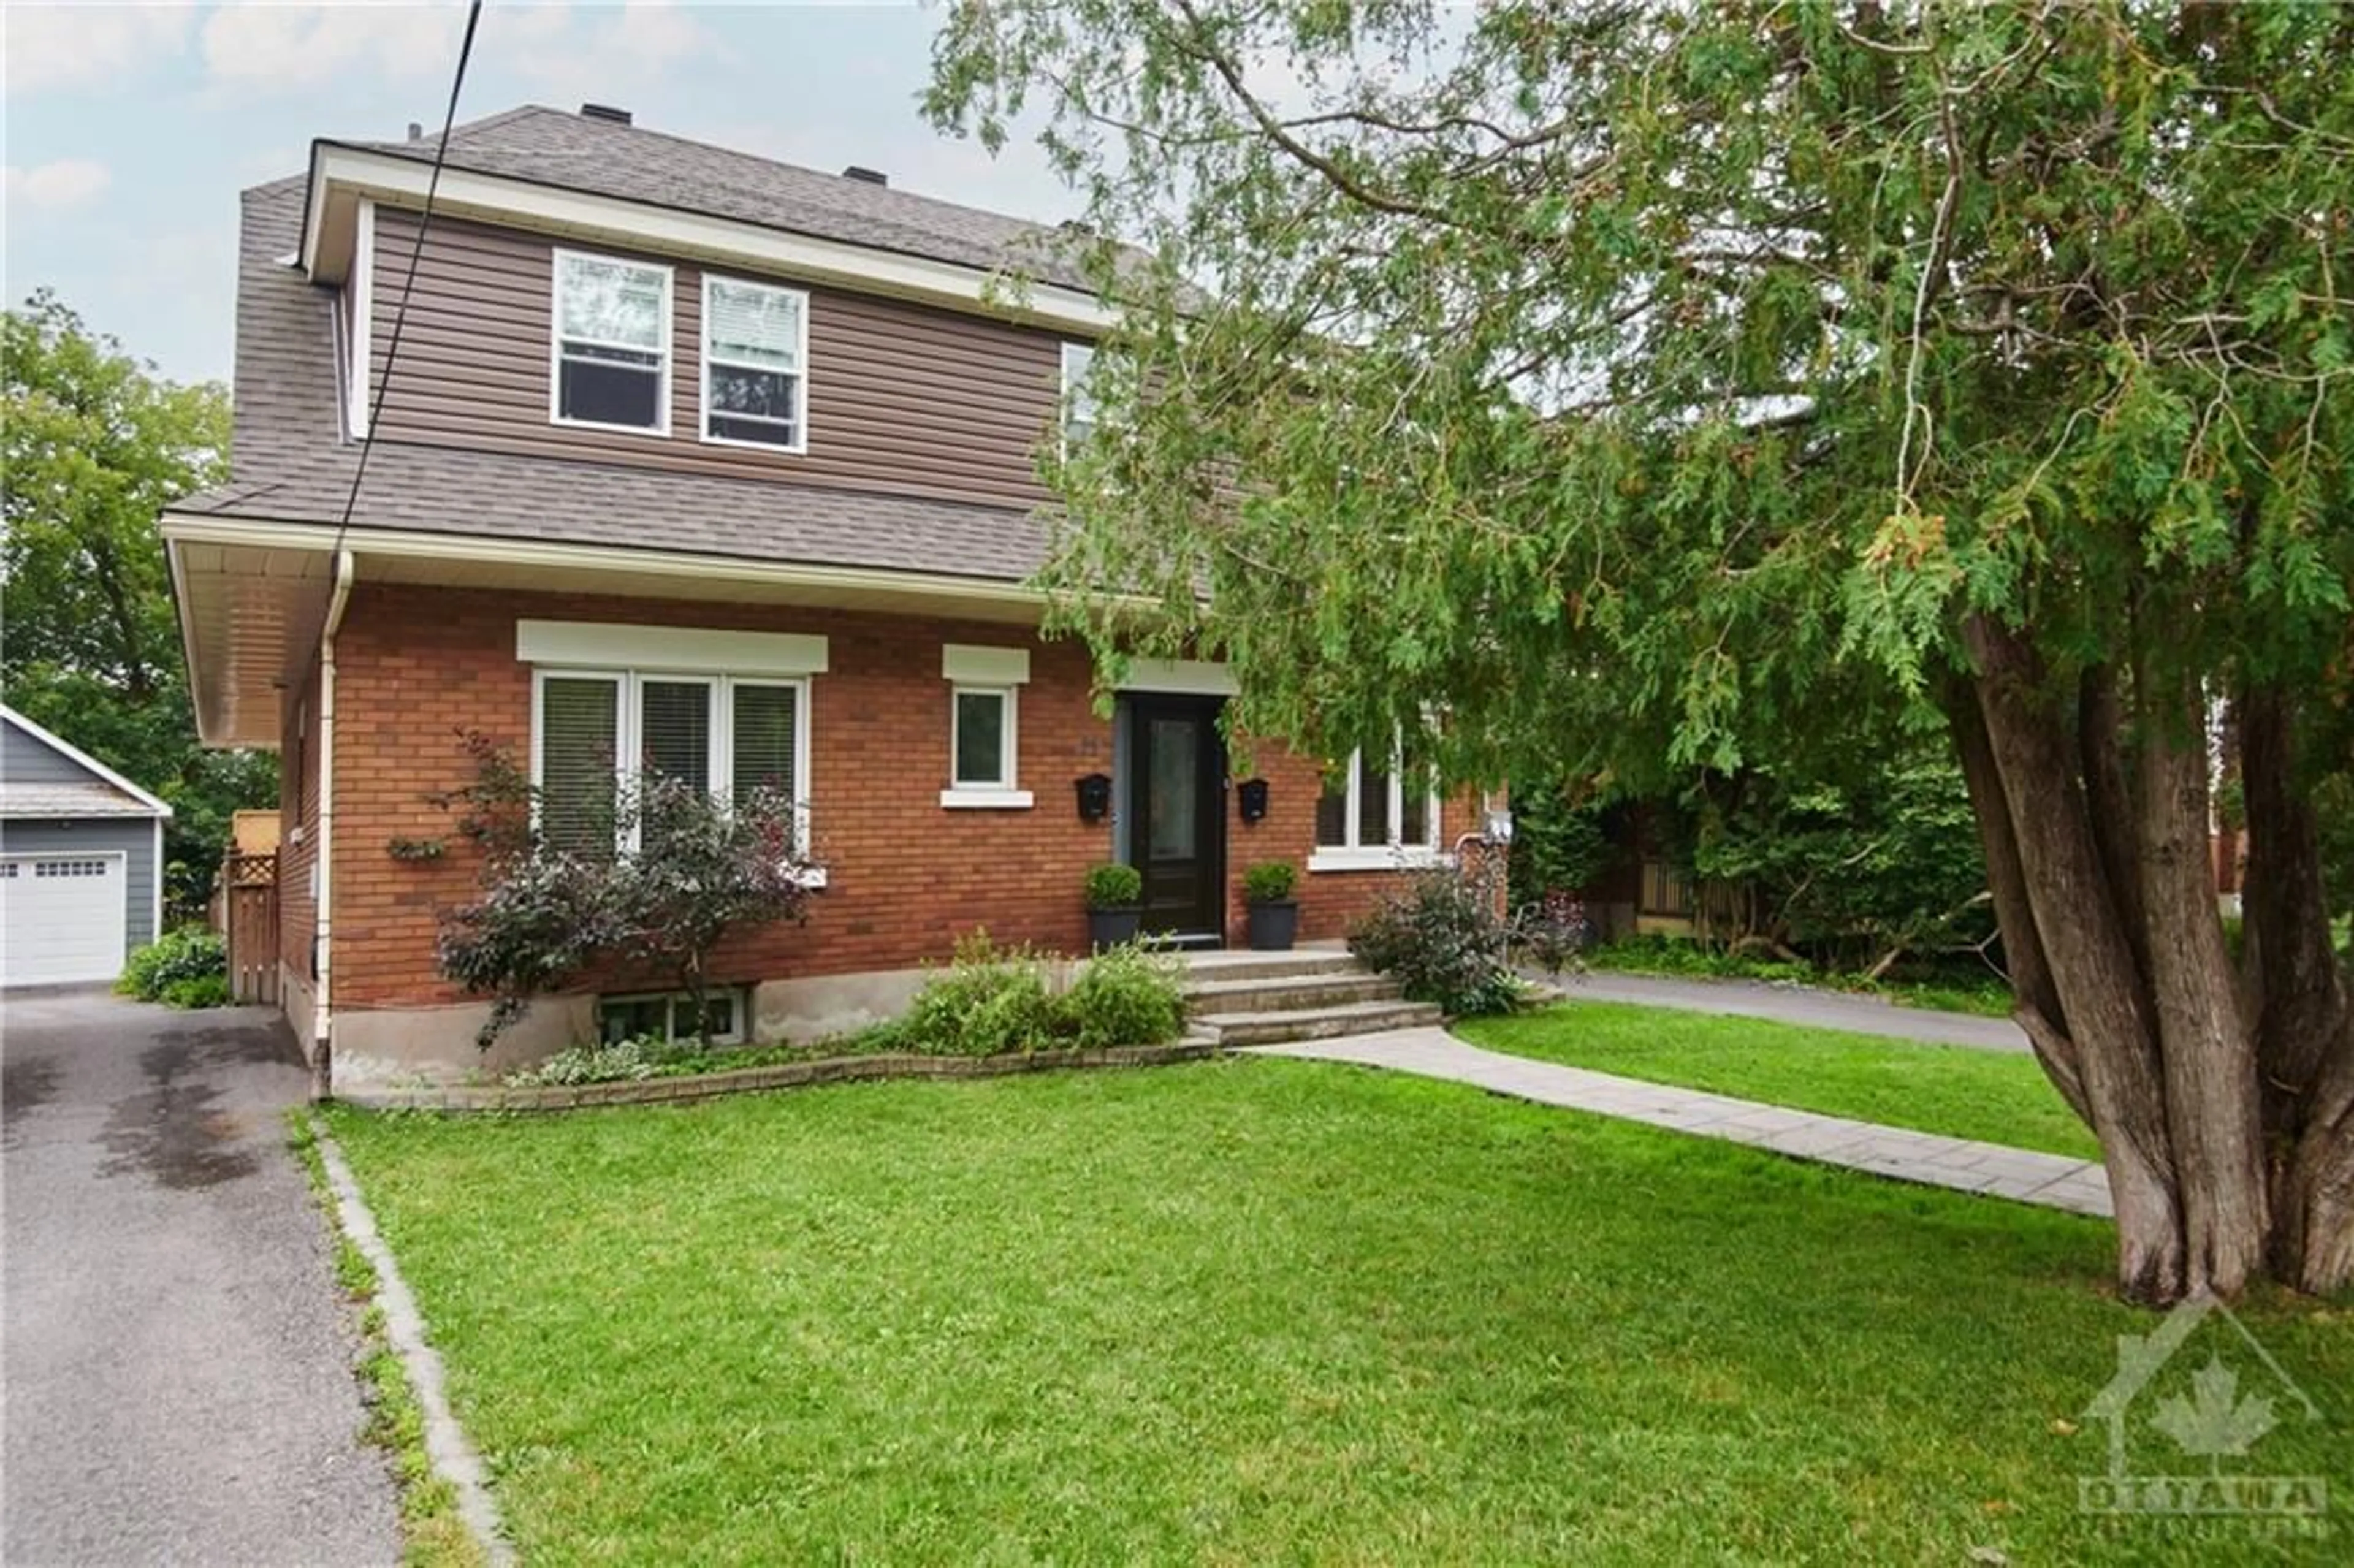 Home with brick exterior material for 22-24 BYRON Ave, Ottawa Ontario K1Y 3H9